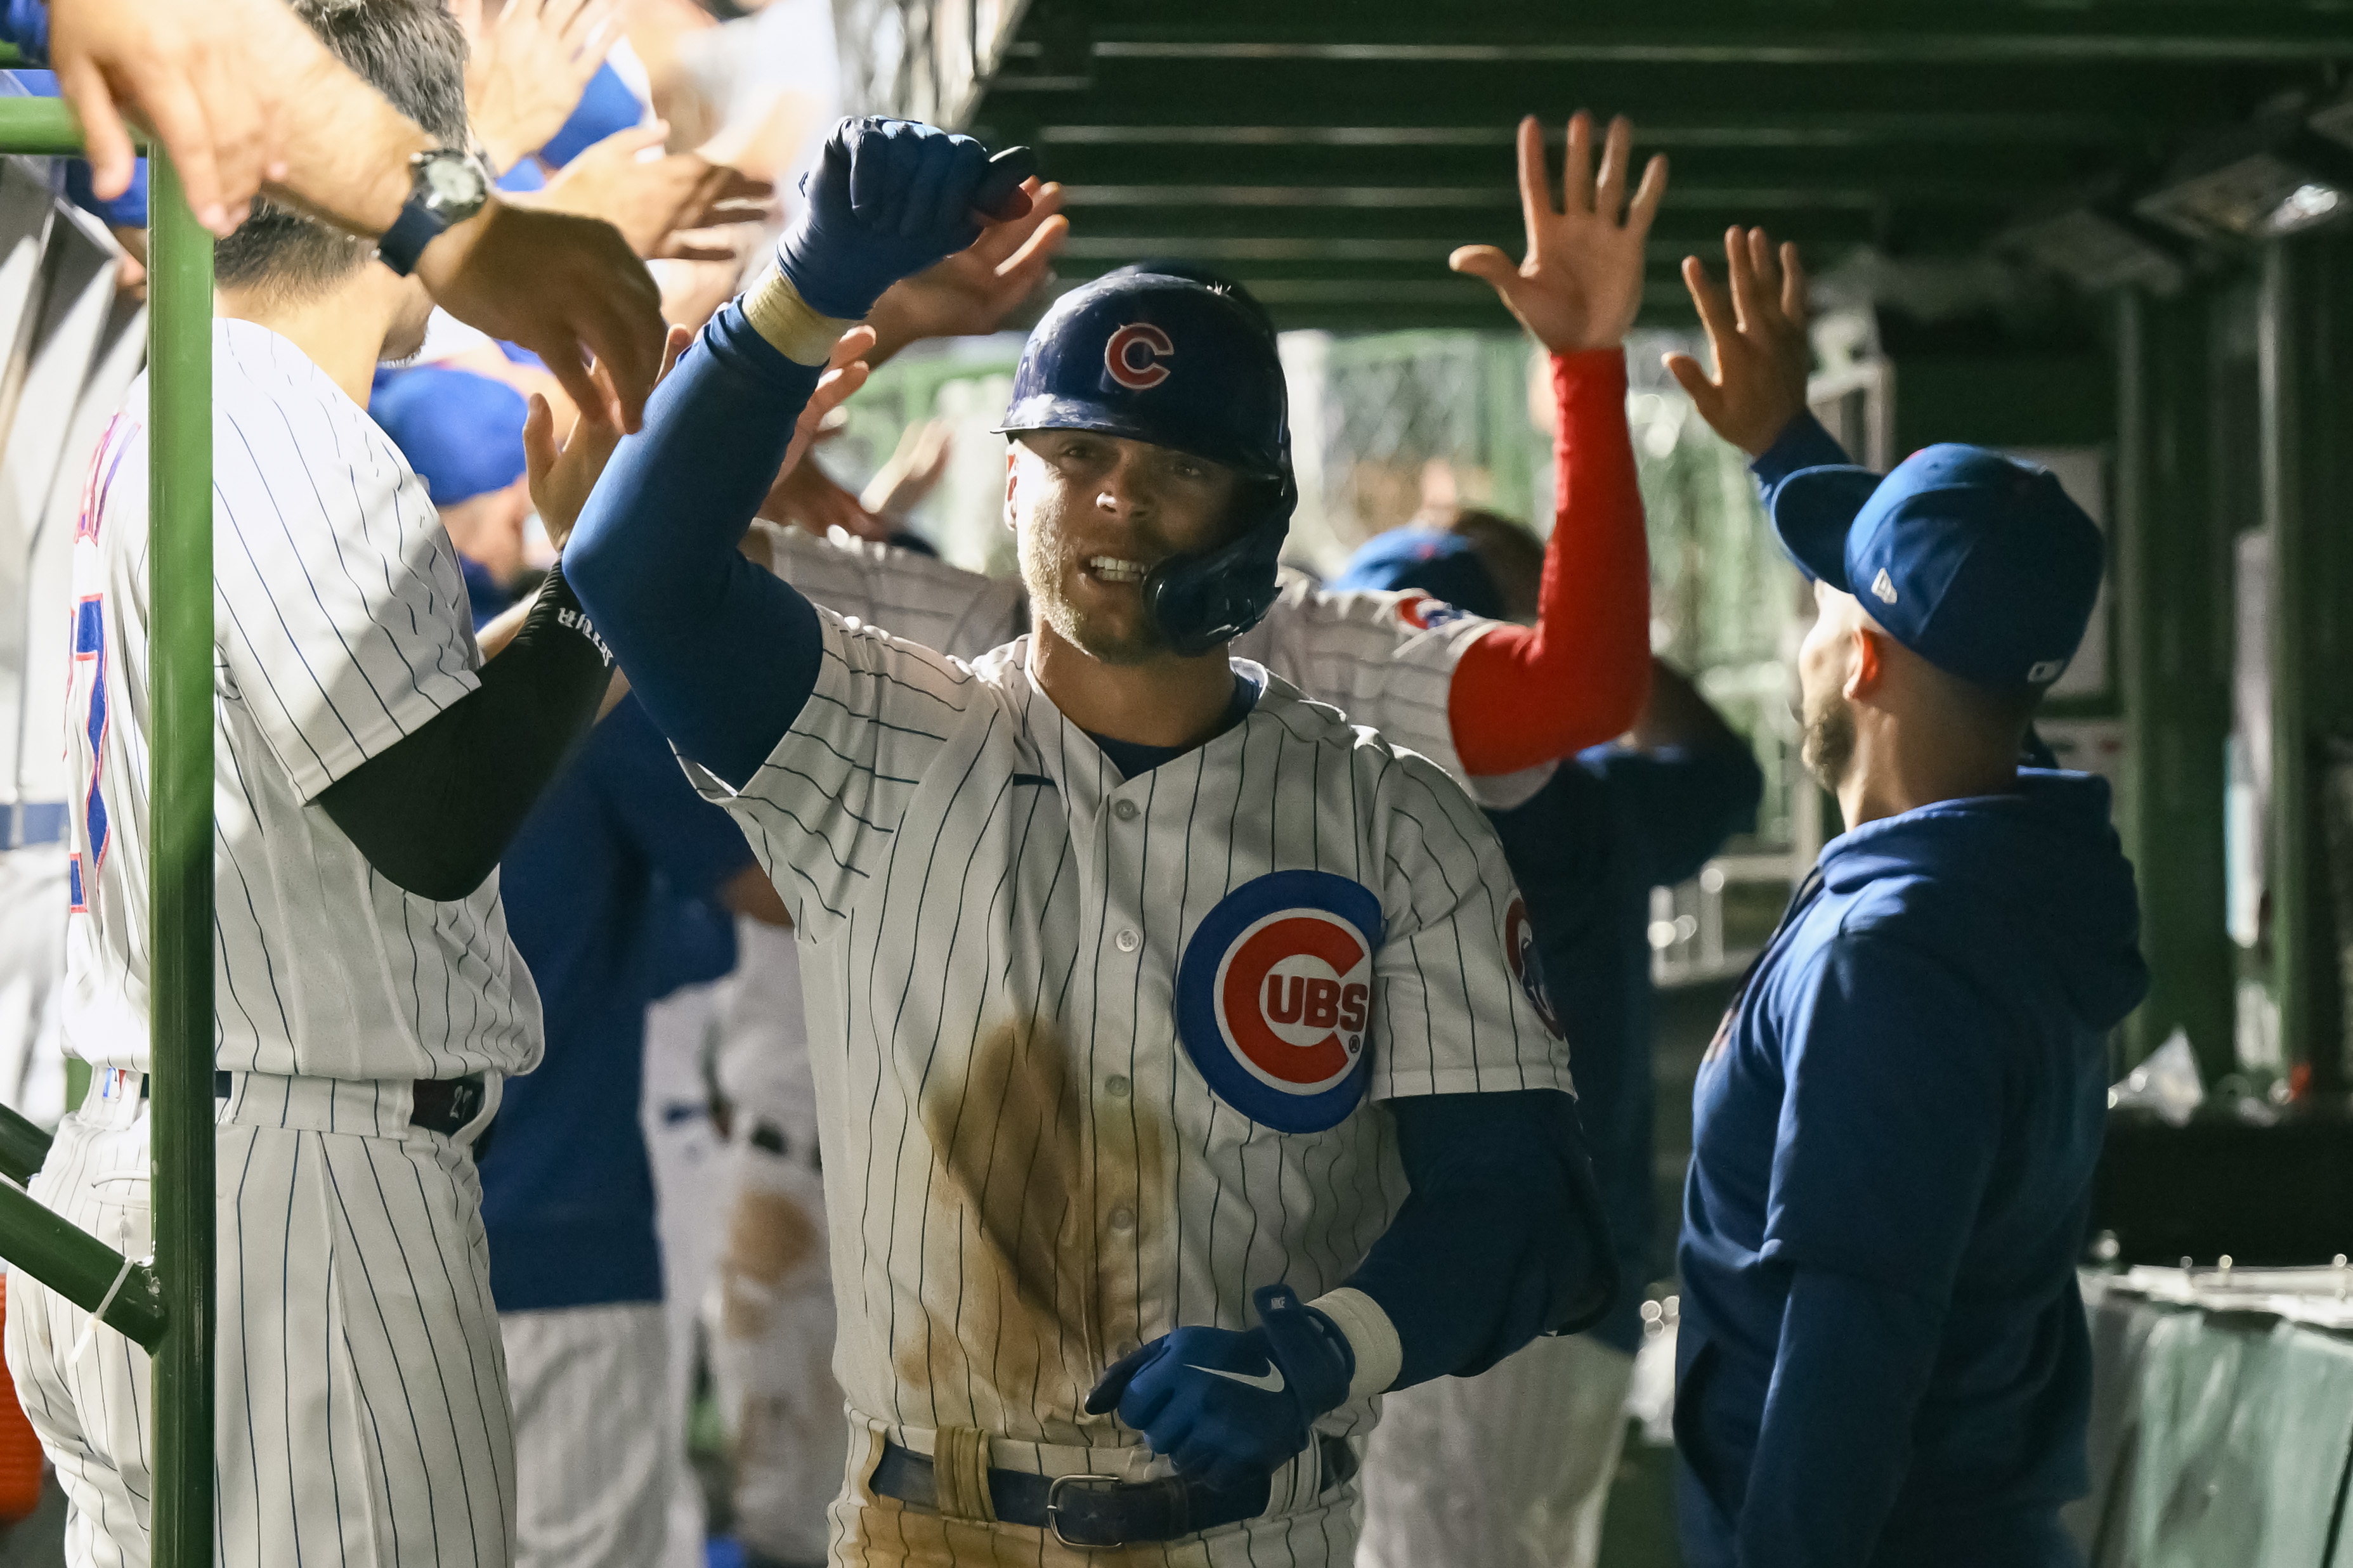 Hoerner's grand slam paves way for 8-3 Cubs win over Nationals – NBC Chicago